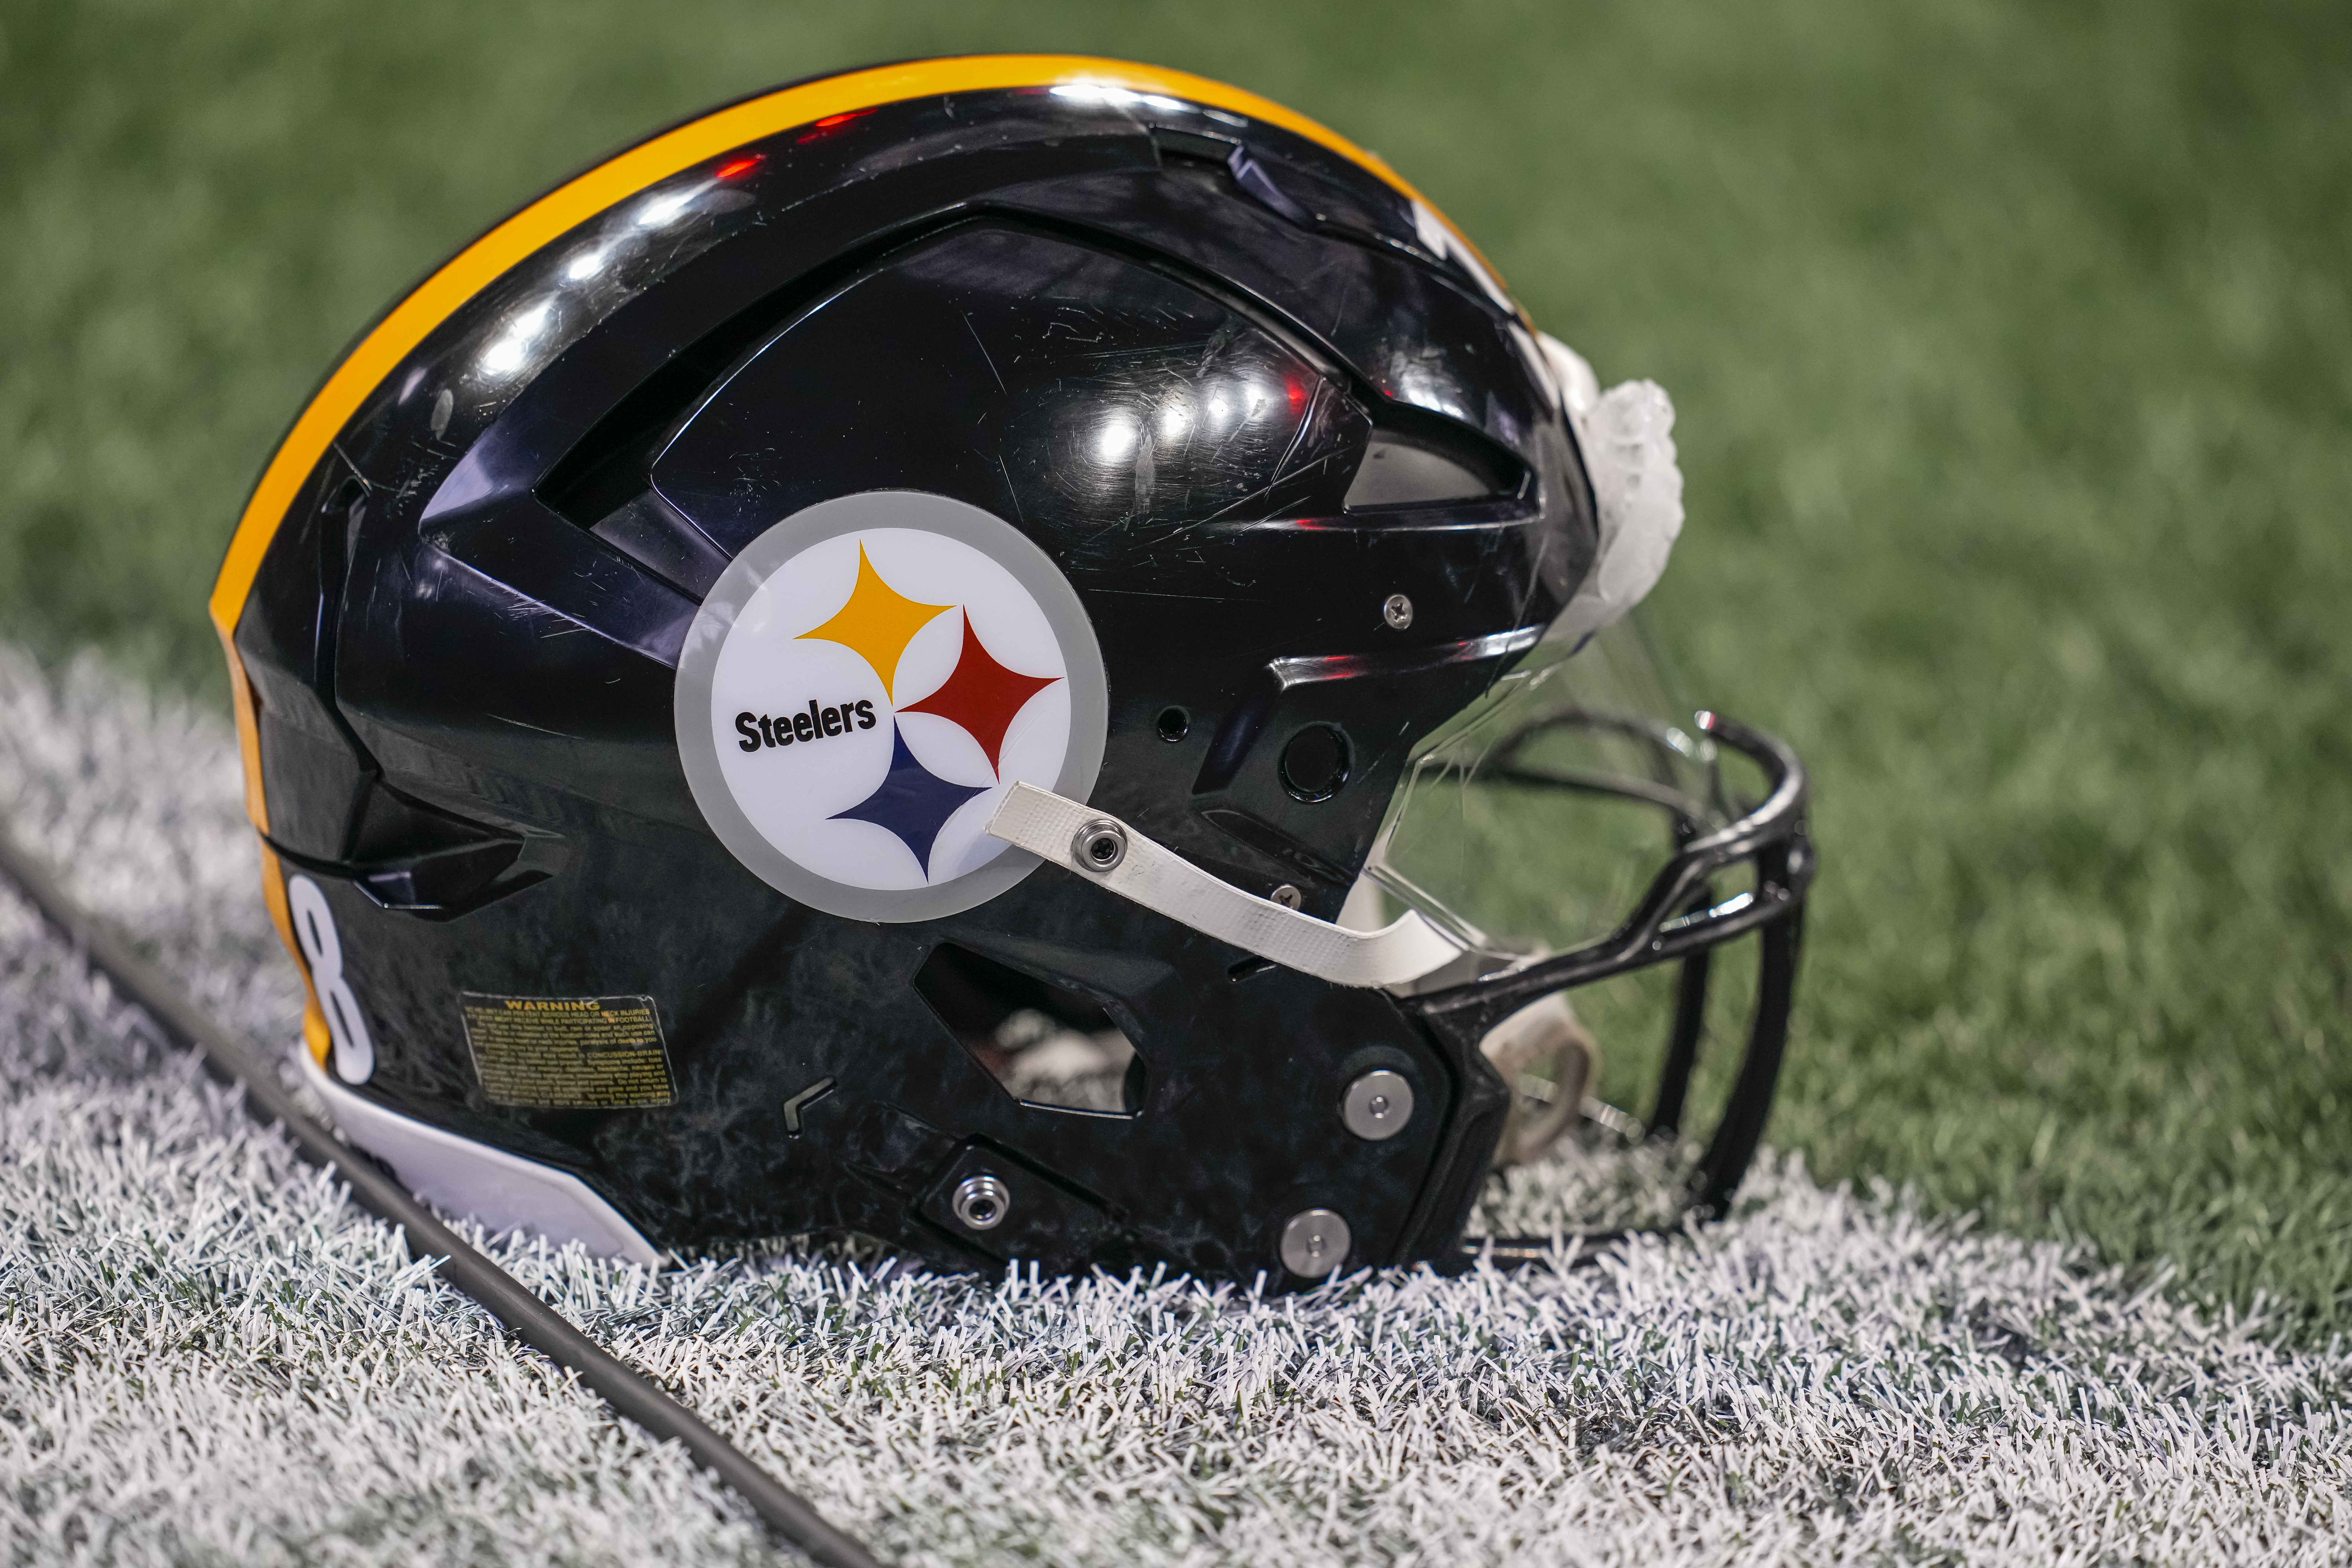 Pittsburgh Steelers release Friday injury report ahead of Sunday Night  Football matchup vs. Raiders